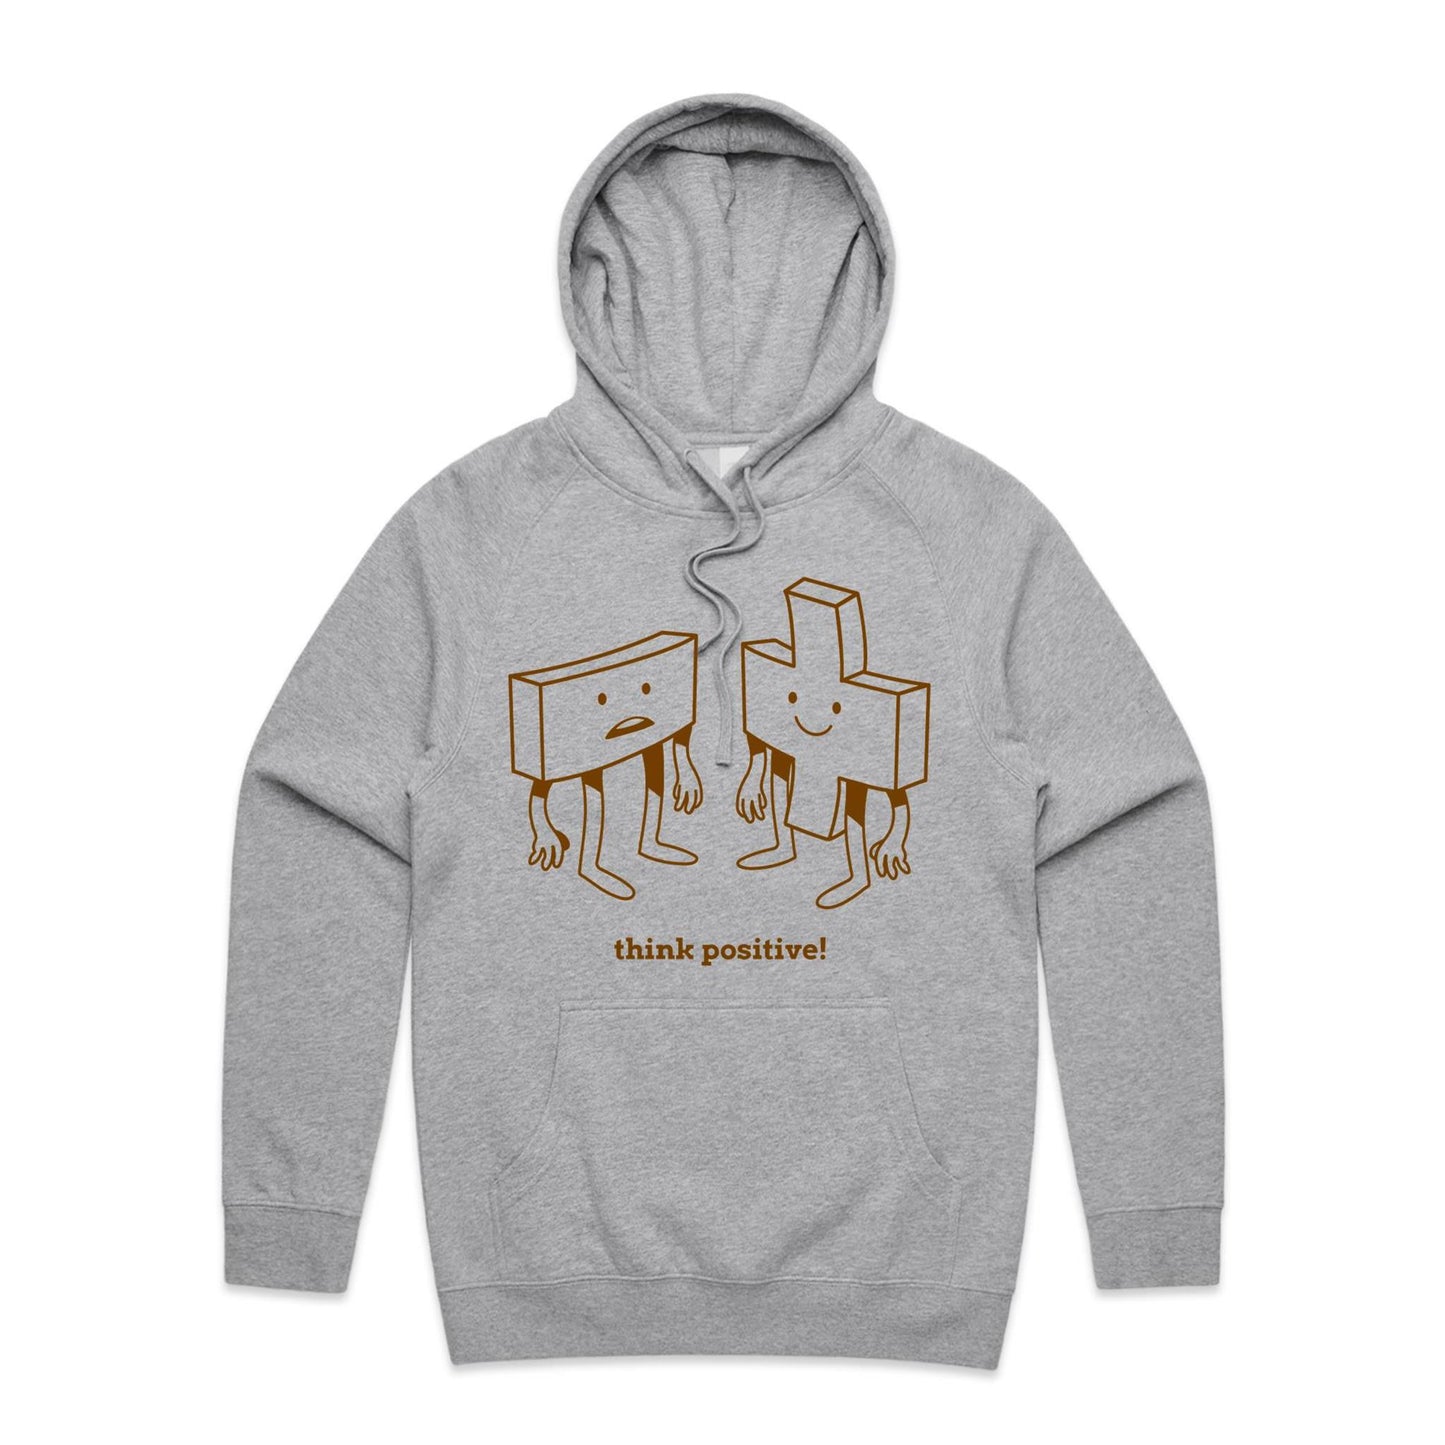 Think Positive, Plus And Minus - Supply Hood Grey Marle Mens Supply Hoodie Maths Motivation